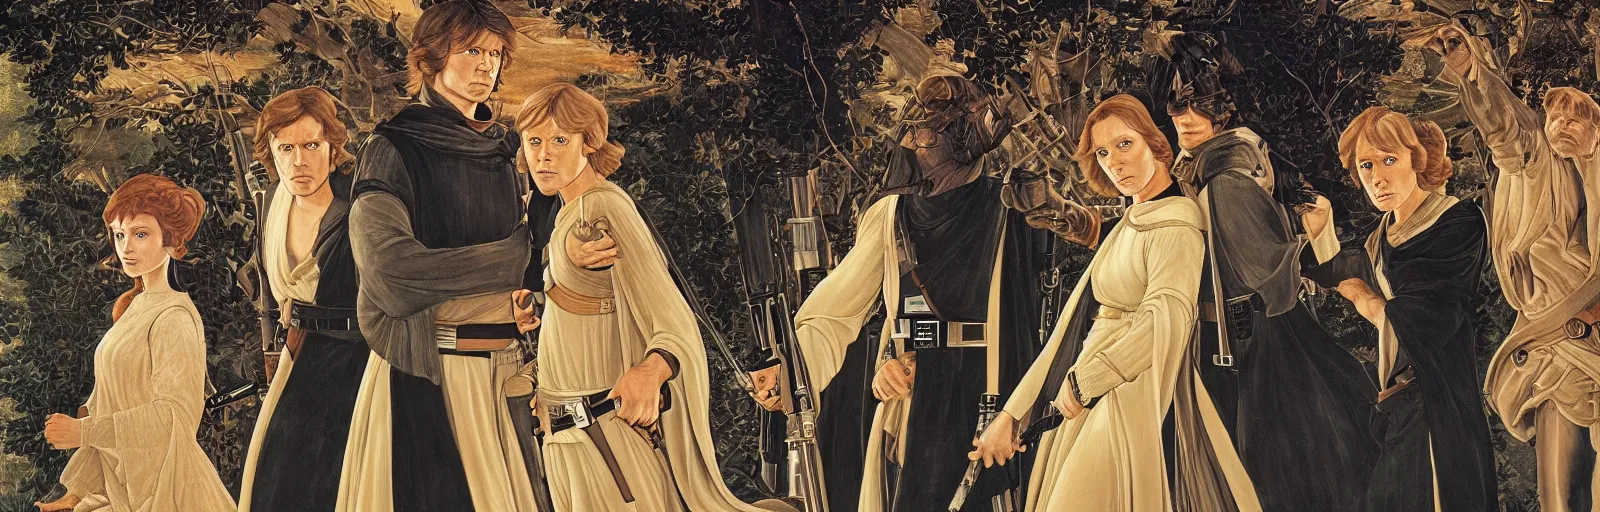 Prompt: luke skywalker, princess leia and han solo in return of the jedi, by sandro botticelli